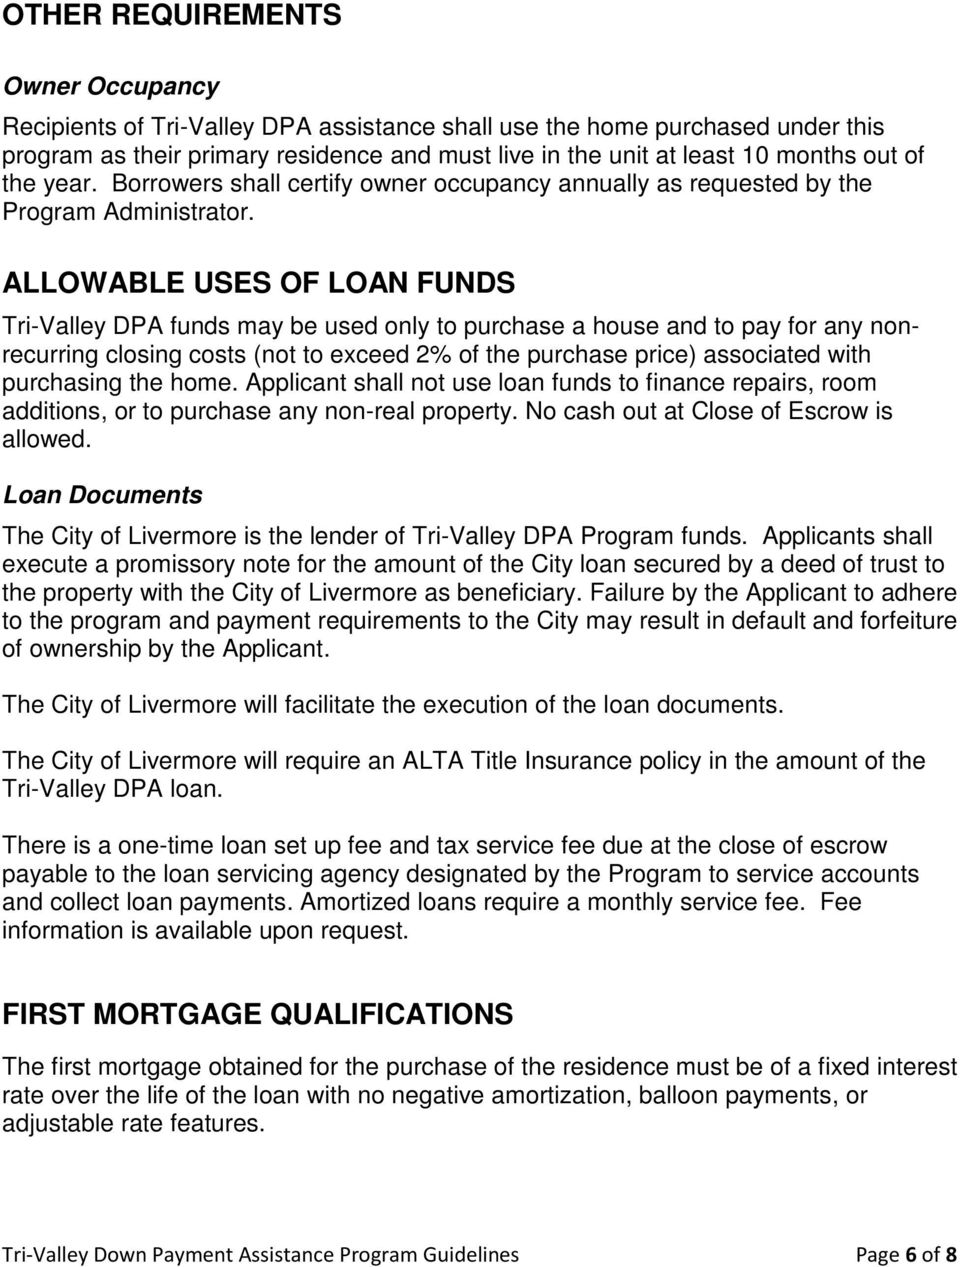 ALLOWABLE USES OF LOAN FUNDS Tri-Valley DPA funds may be used only to purchase a house and to pay for any nonrecurring closing costs (not to exceed 2% of the purchase price) associated with